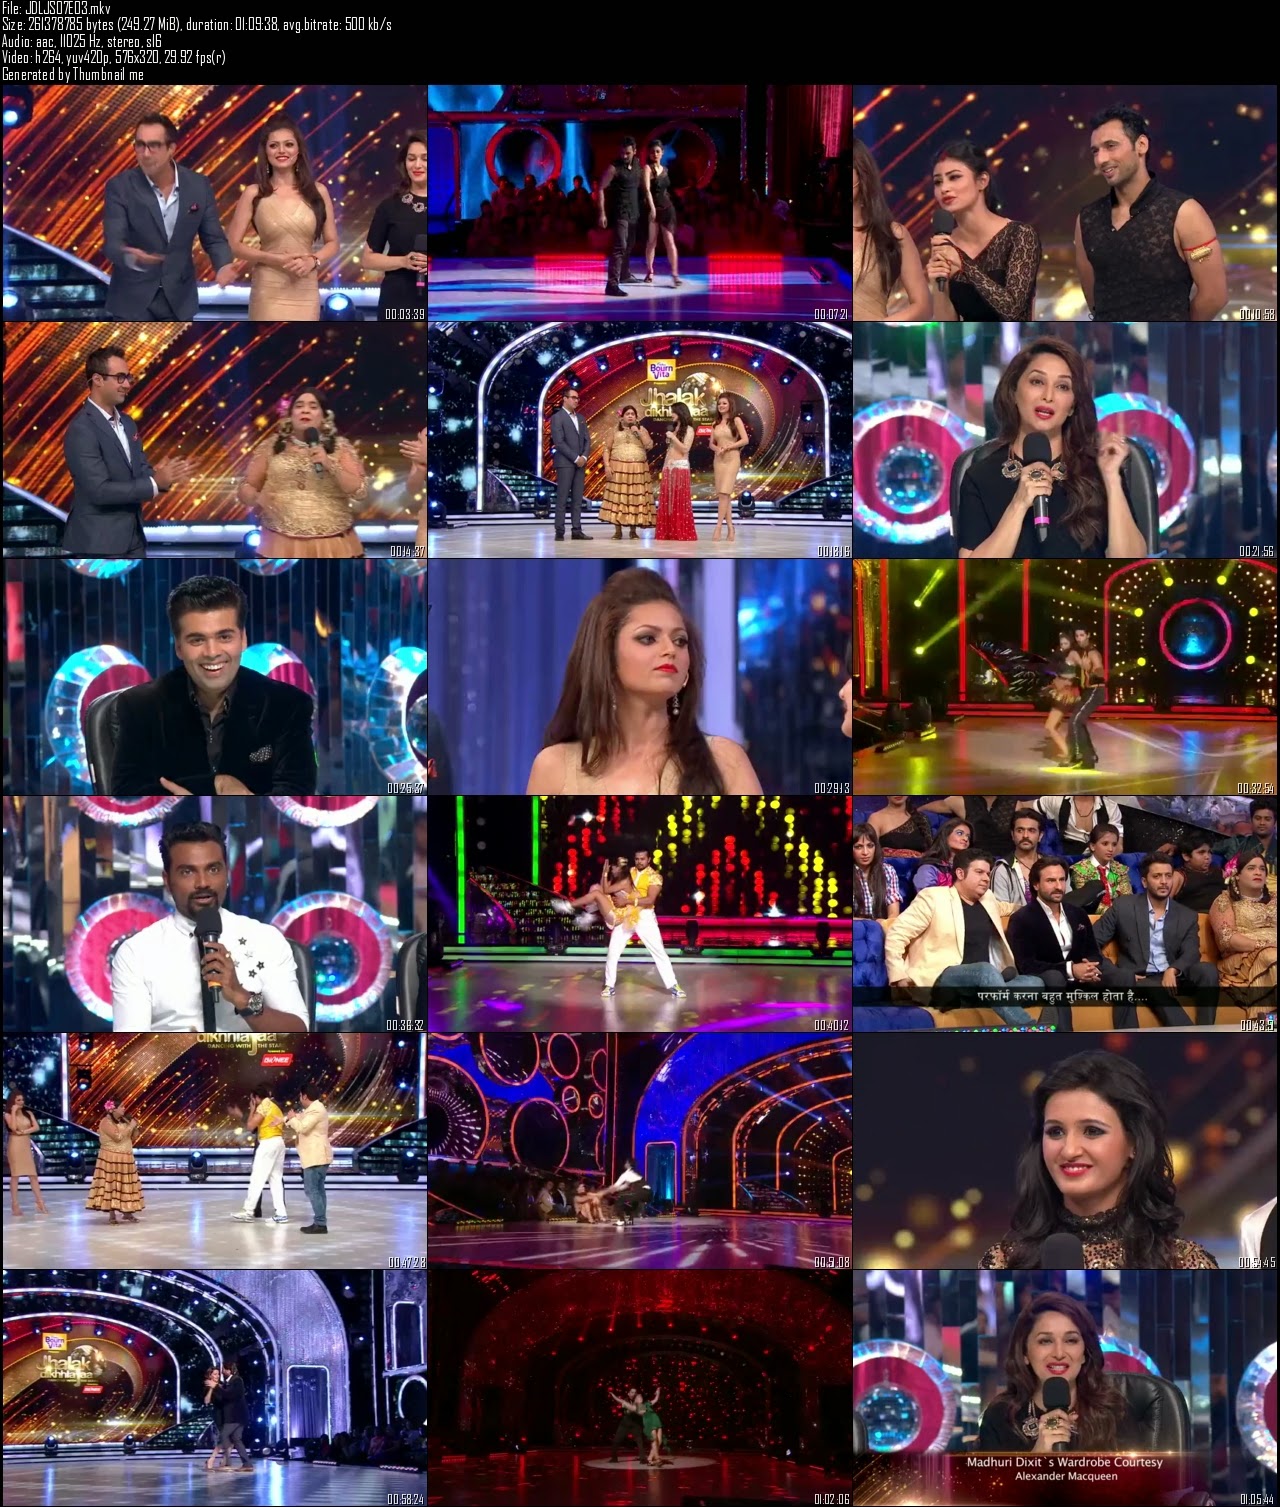 Resumable Mediafire Download Link For Hindi Show Jhalak Dikhla Jaa Season 7 (2014) 14th June 2014 Watch Online Download